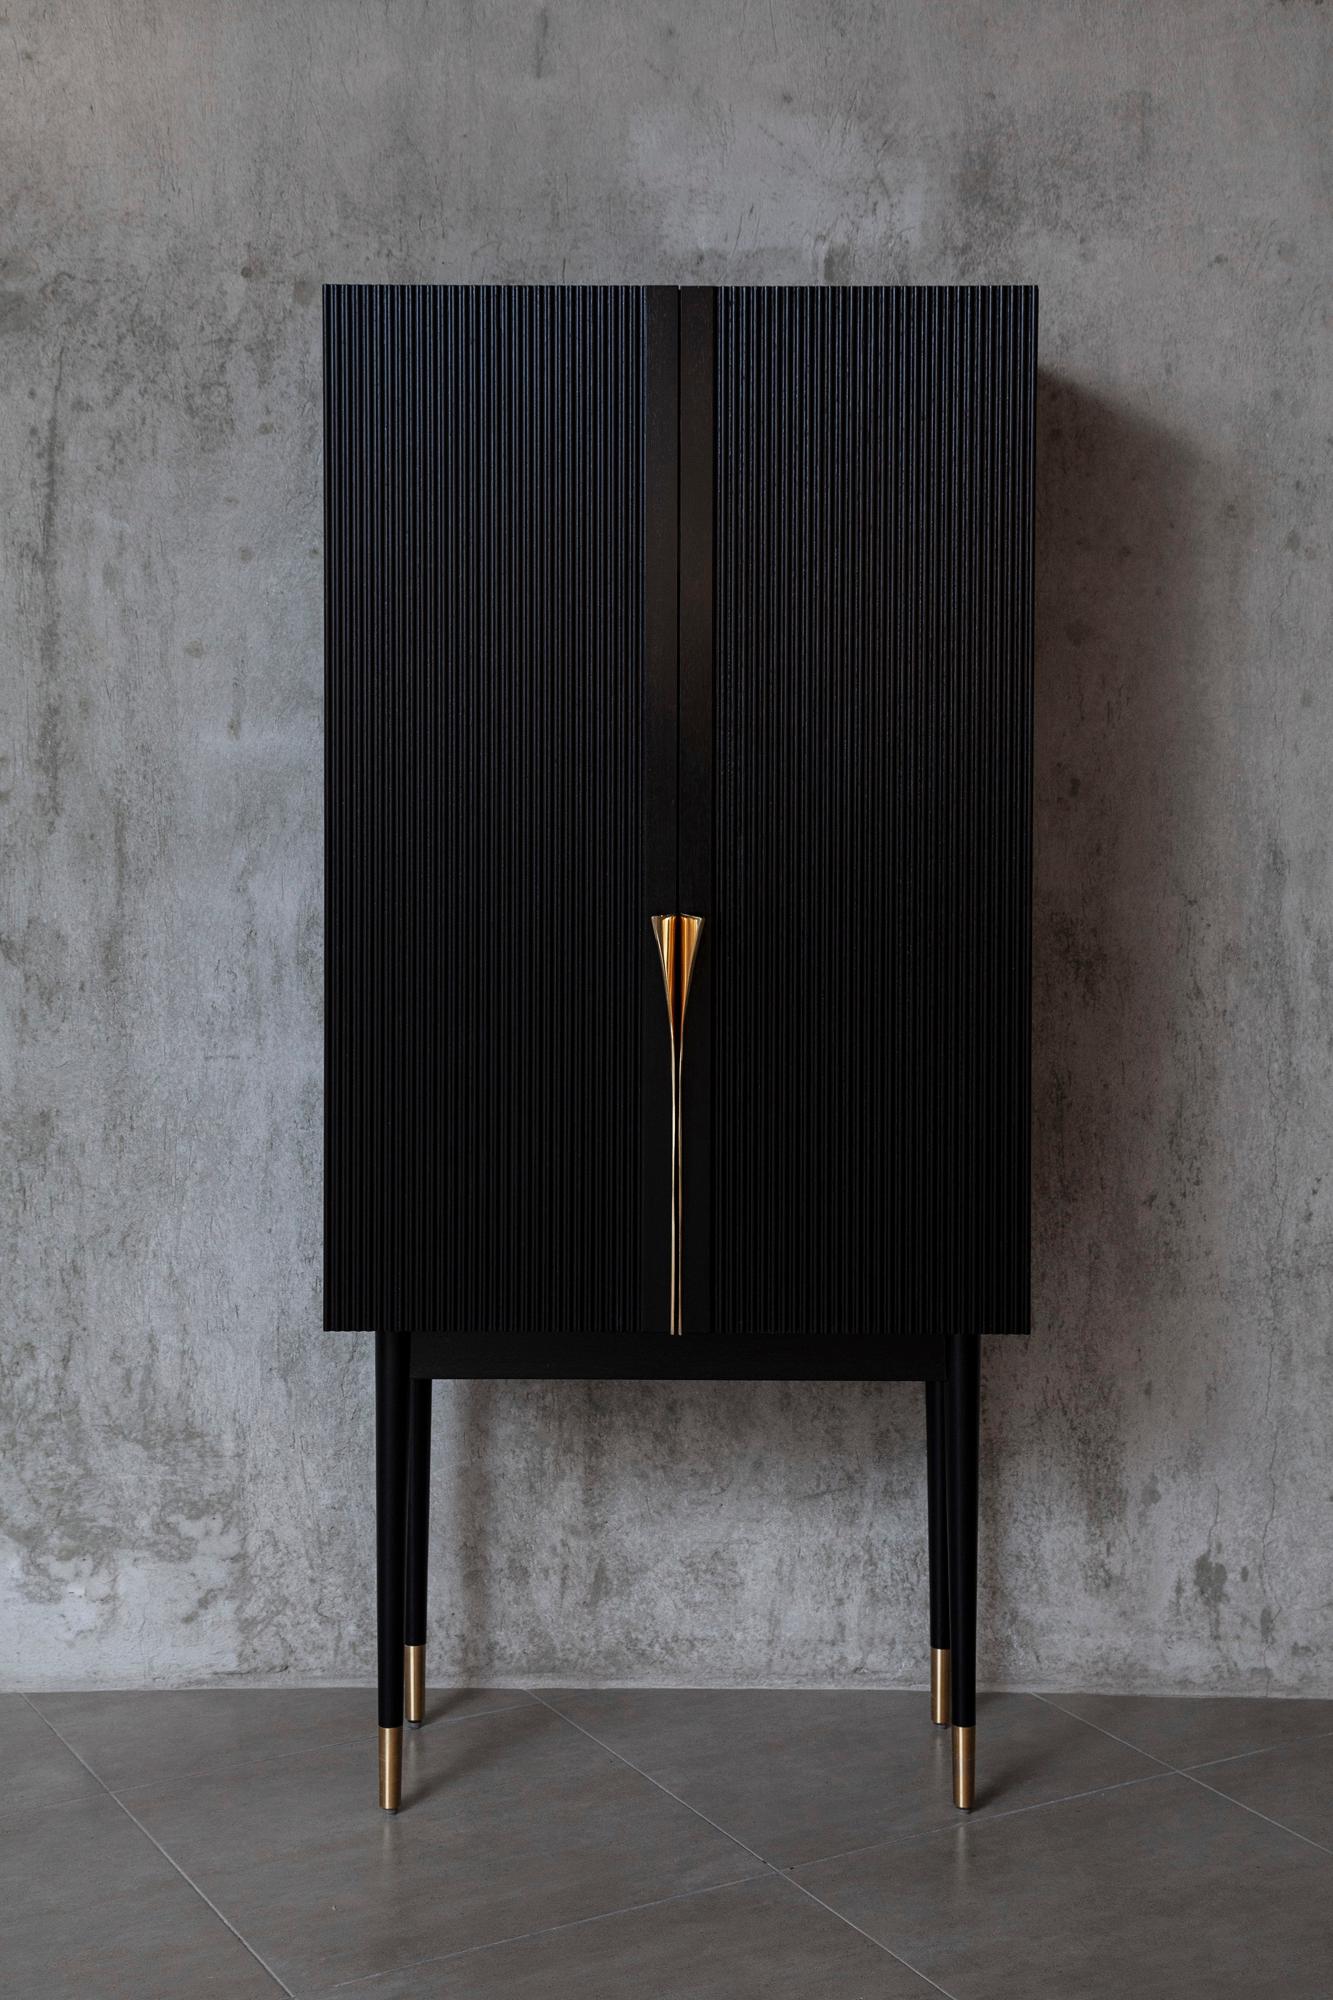 Bar cabinet made of solid seike wood body with Ébano finish, details in lathed bronze, interior surfaces laminated with stainless steel sheets, interior back panel with antique mirror glass, and bronze sand-casted handles. 

The first Perfidia